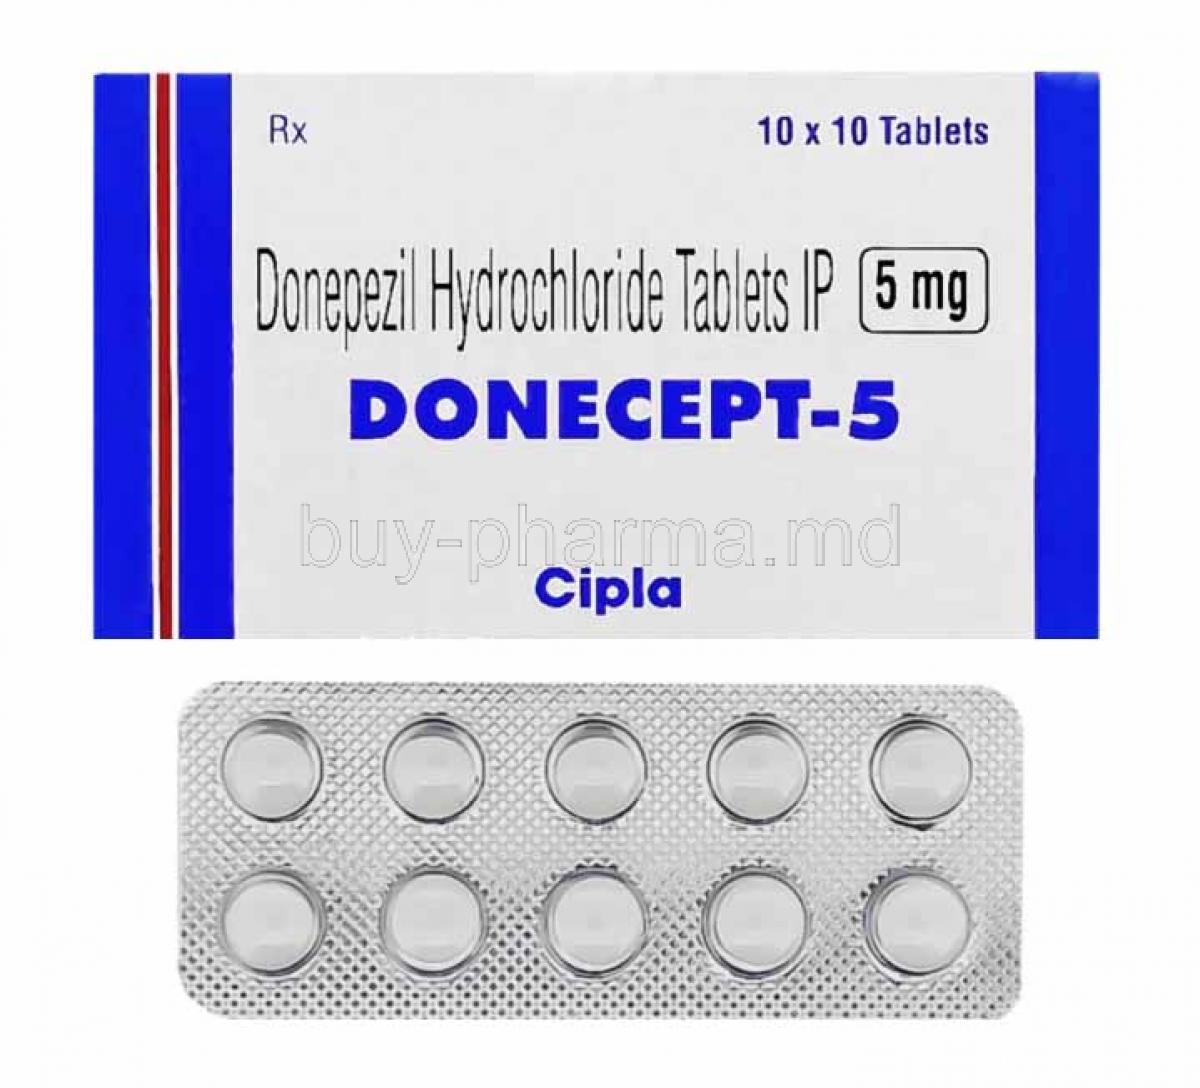 Donecept, Donepezil box and tablets